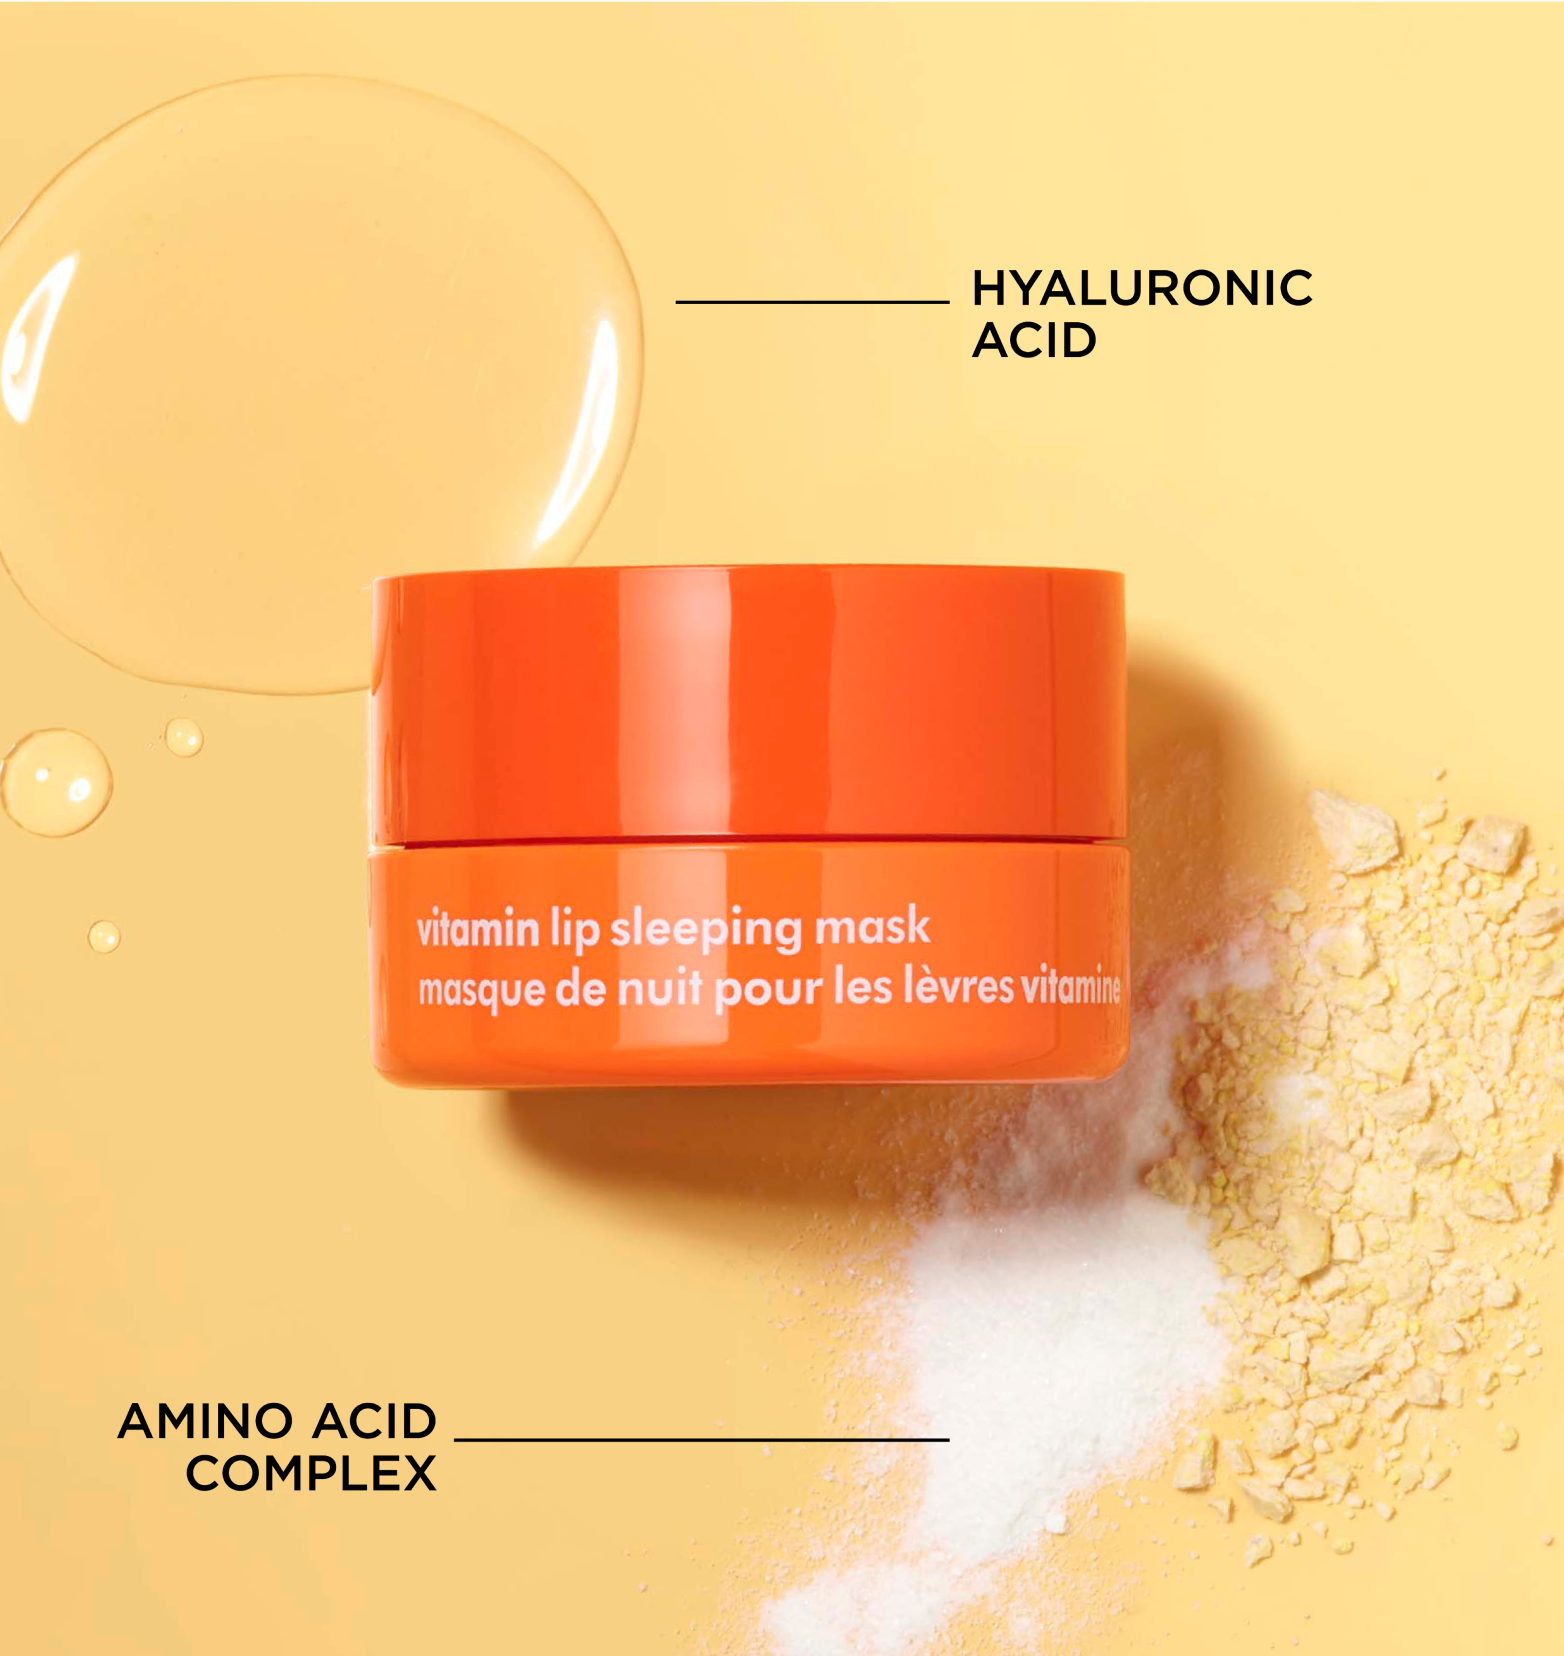 The Face Shop Vitamin Lip Seeping Mask jar on a light orange background. The background is featuring the liquid hyaluronic texture on the top and powdered amino acid texture on the bottom.